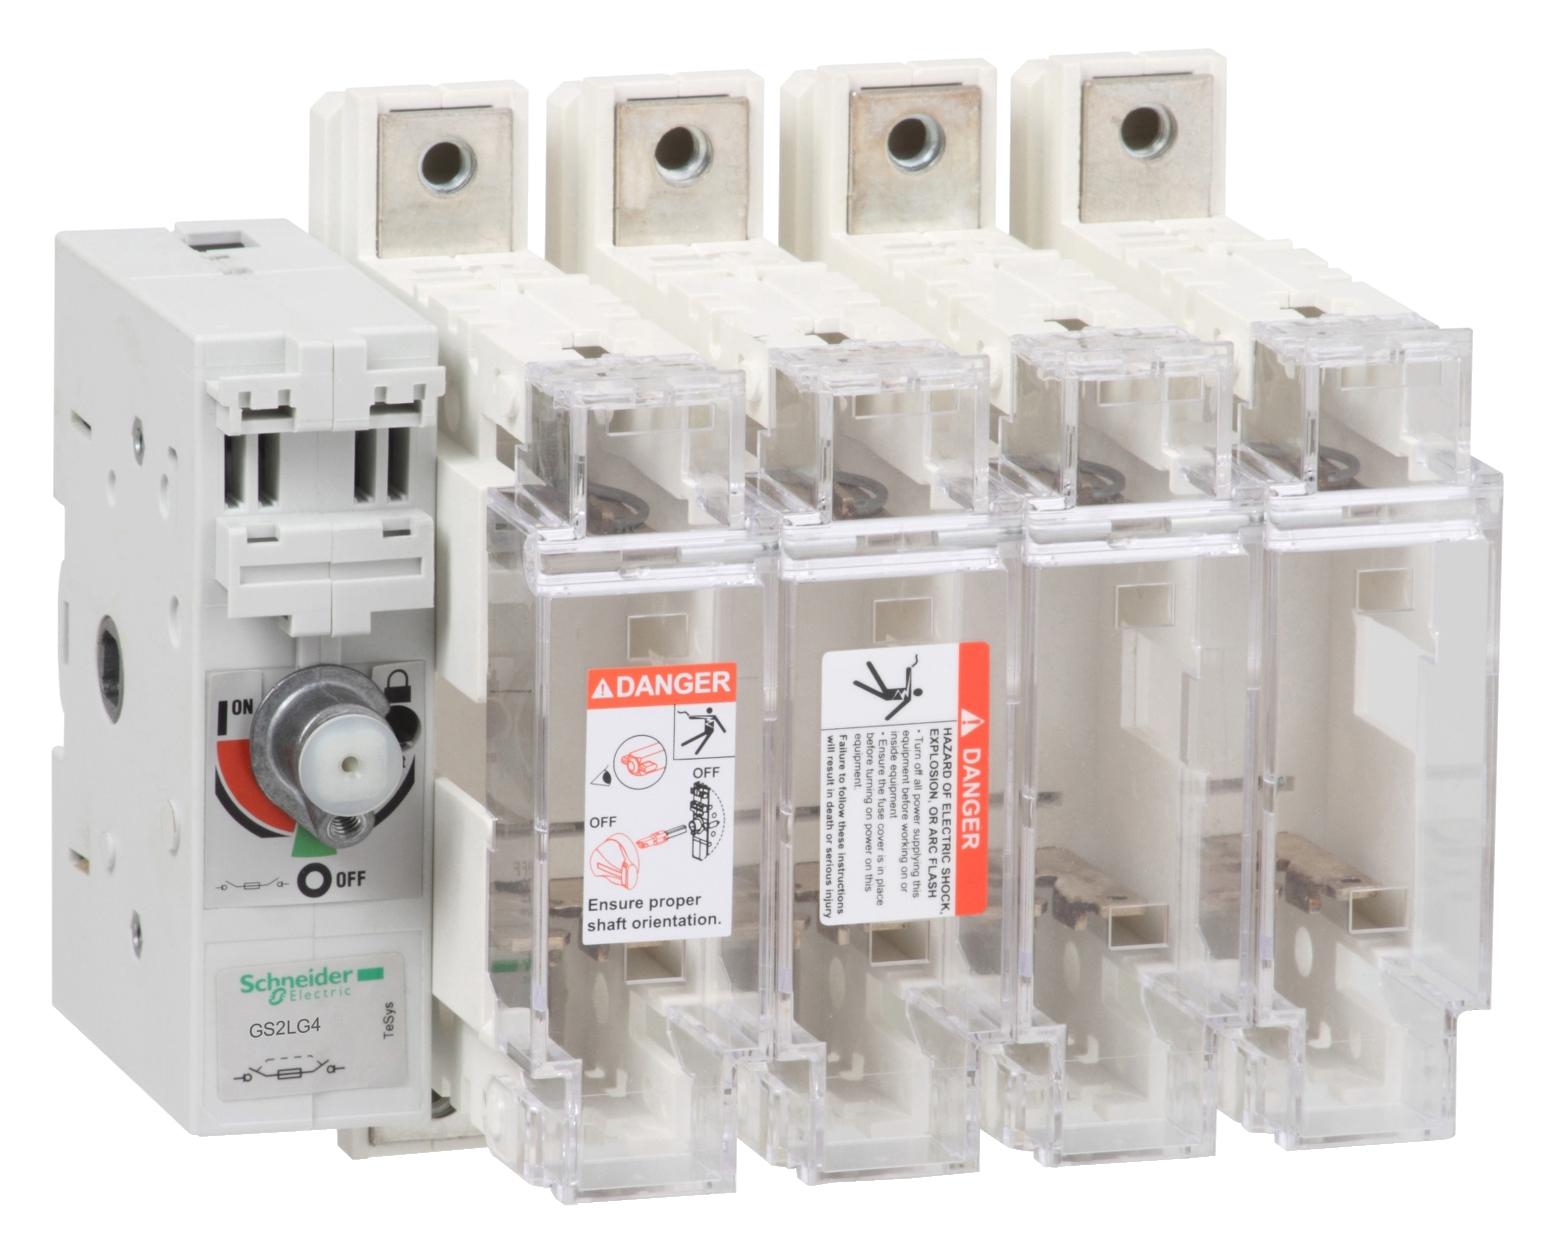 GS2LG4 FUSE DISCONNECT SW. 4X 160A 0 SCHNEIDER ELECTRIC